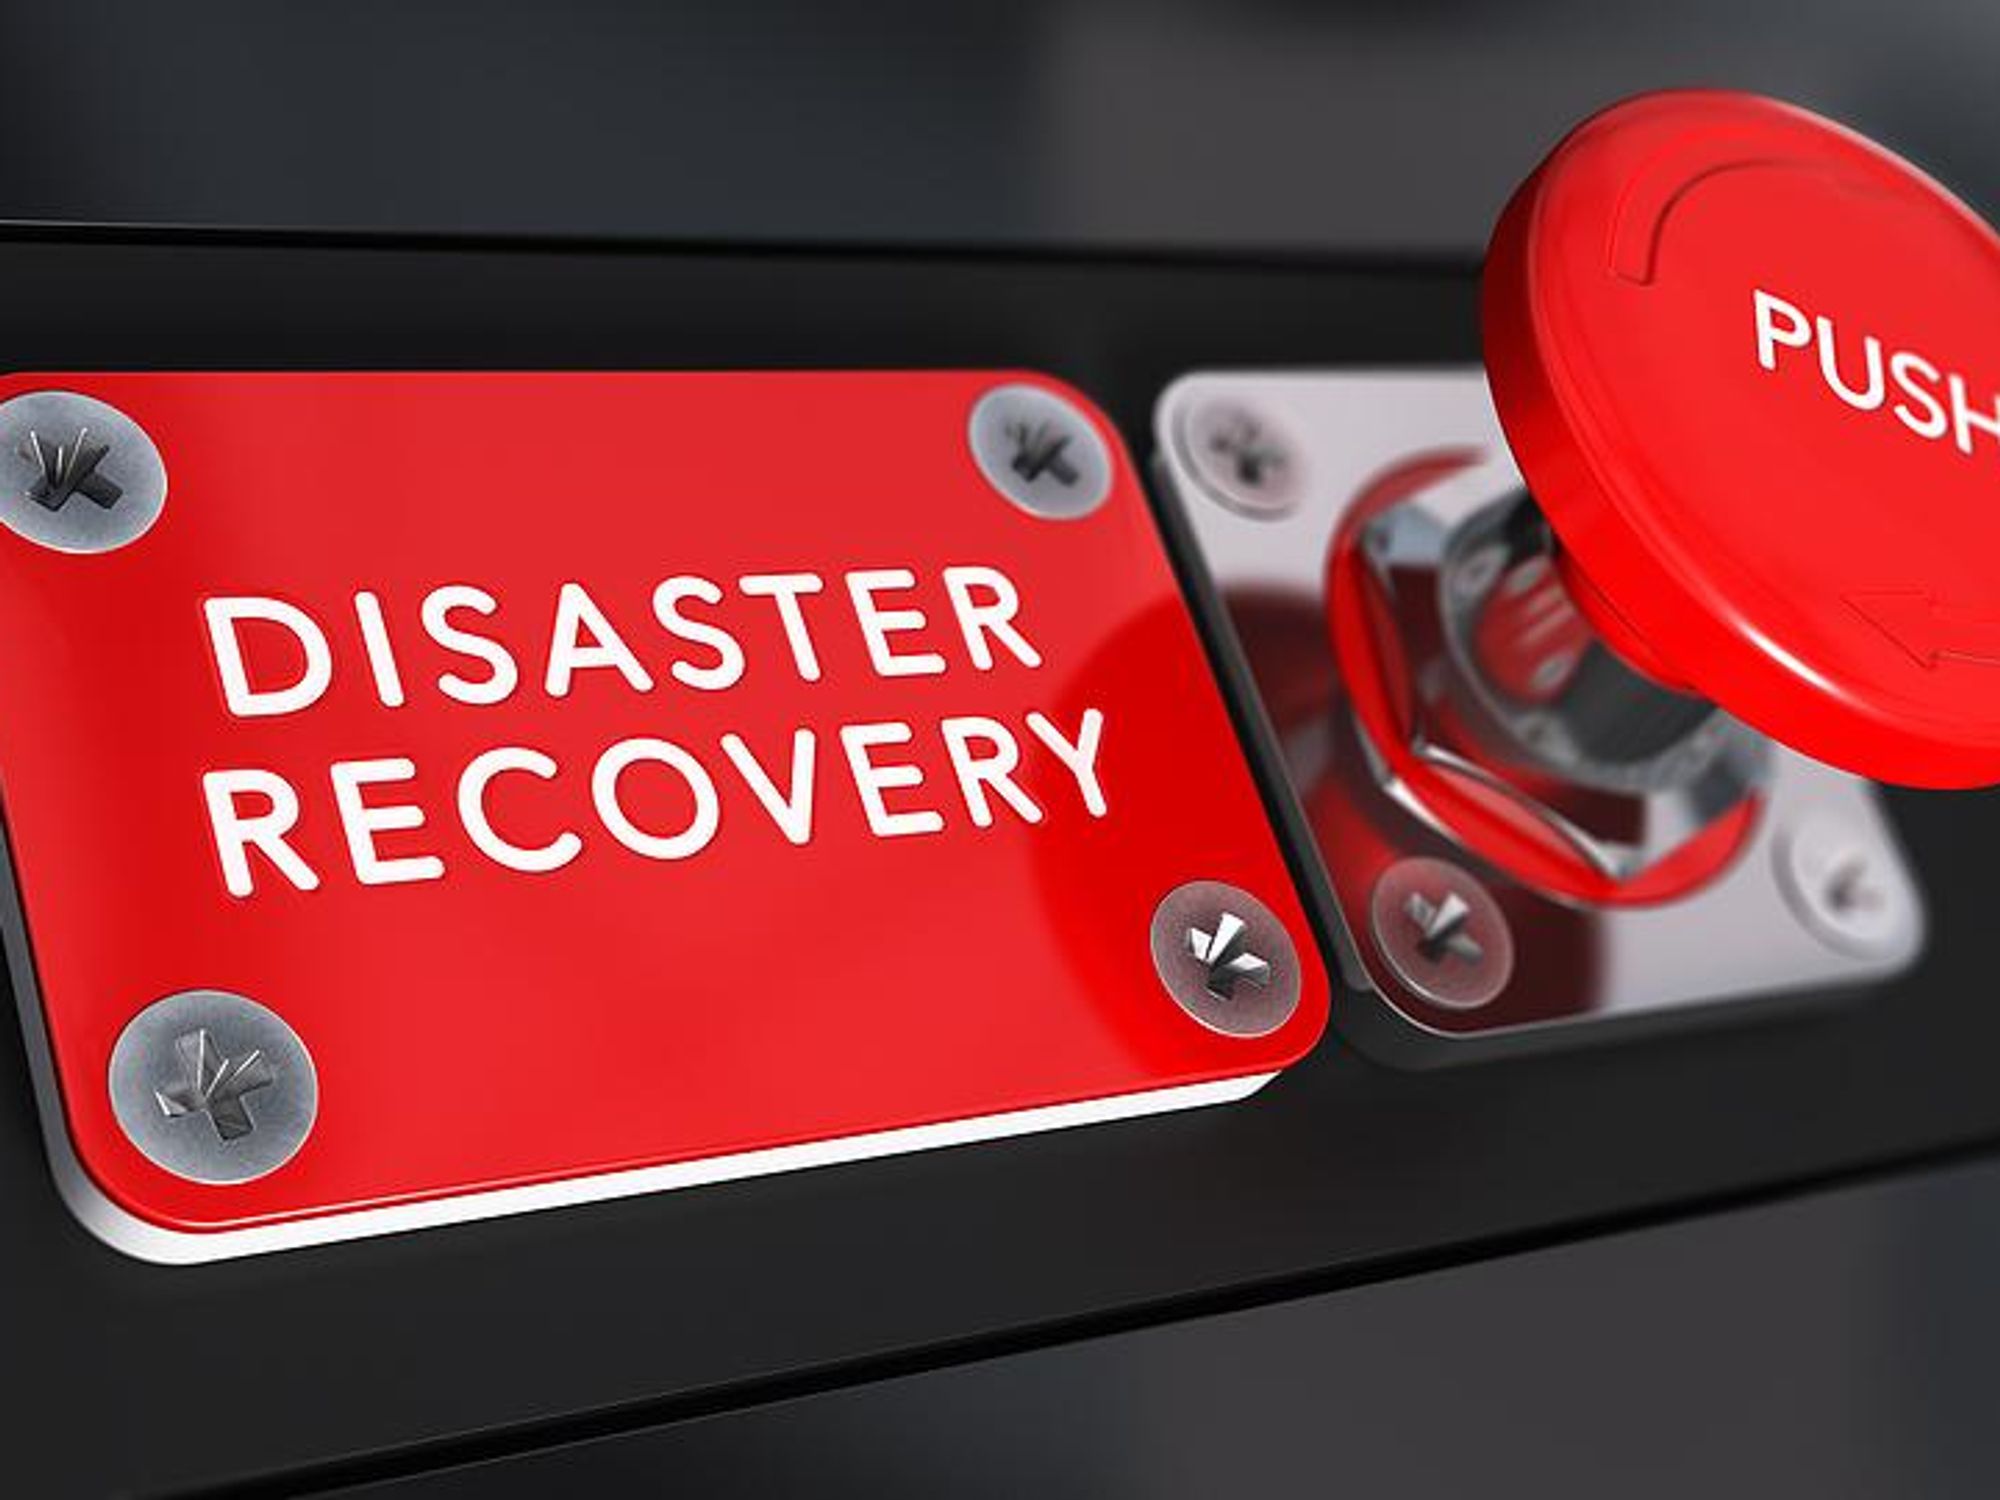 Disaster recovery concept